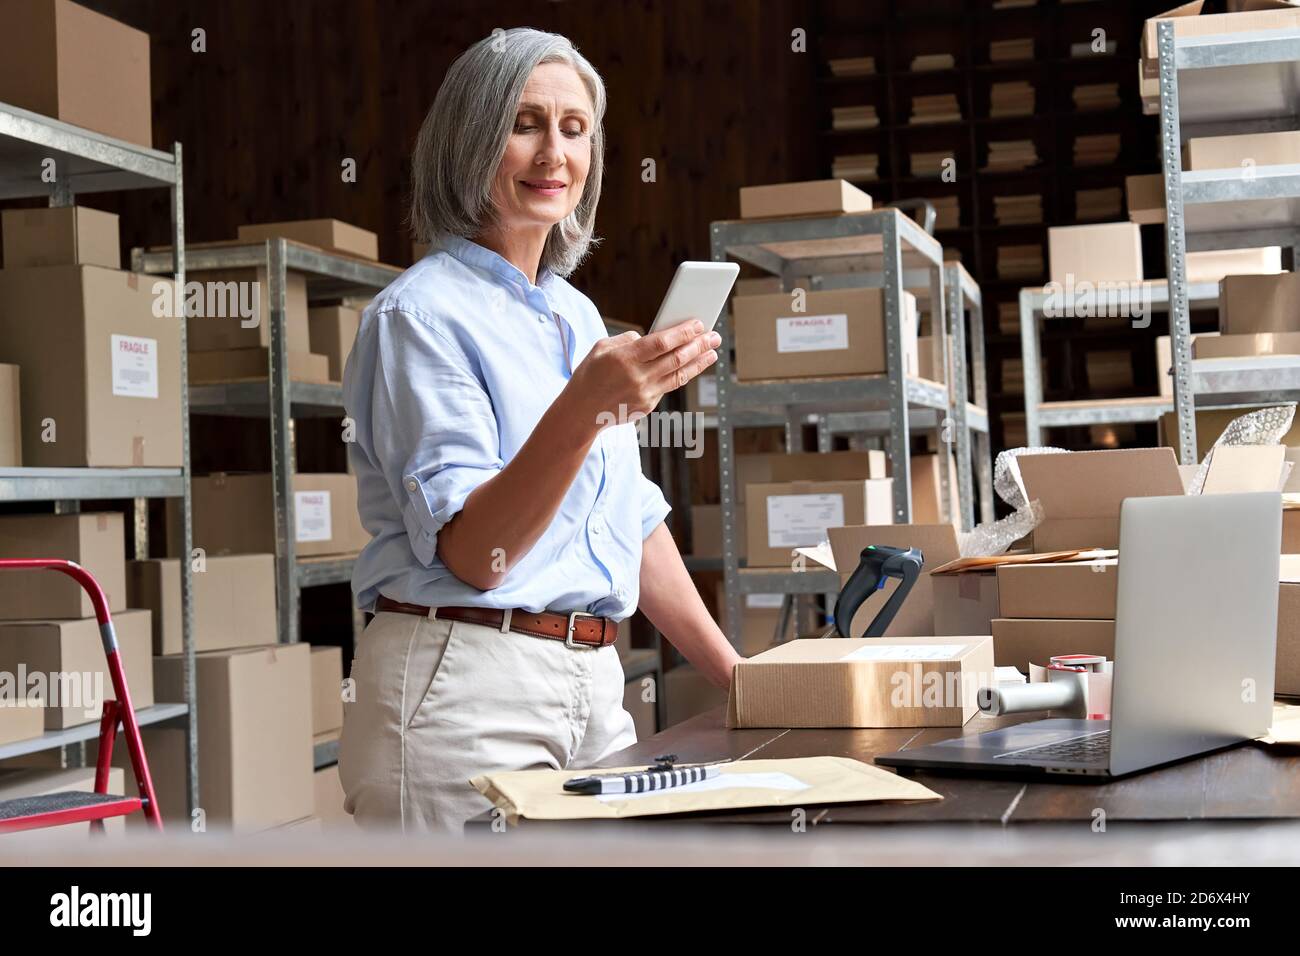 Female small business owner using mobile app on smartphone checking parcel box. Stock Photo